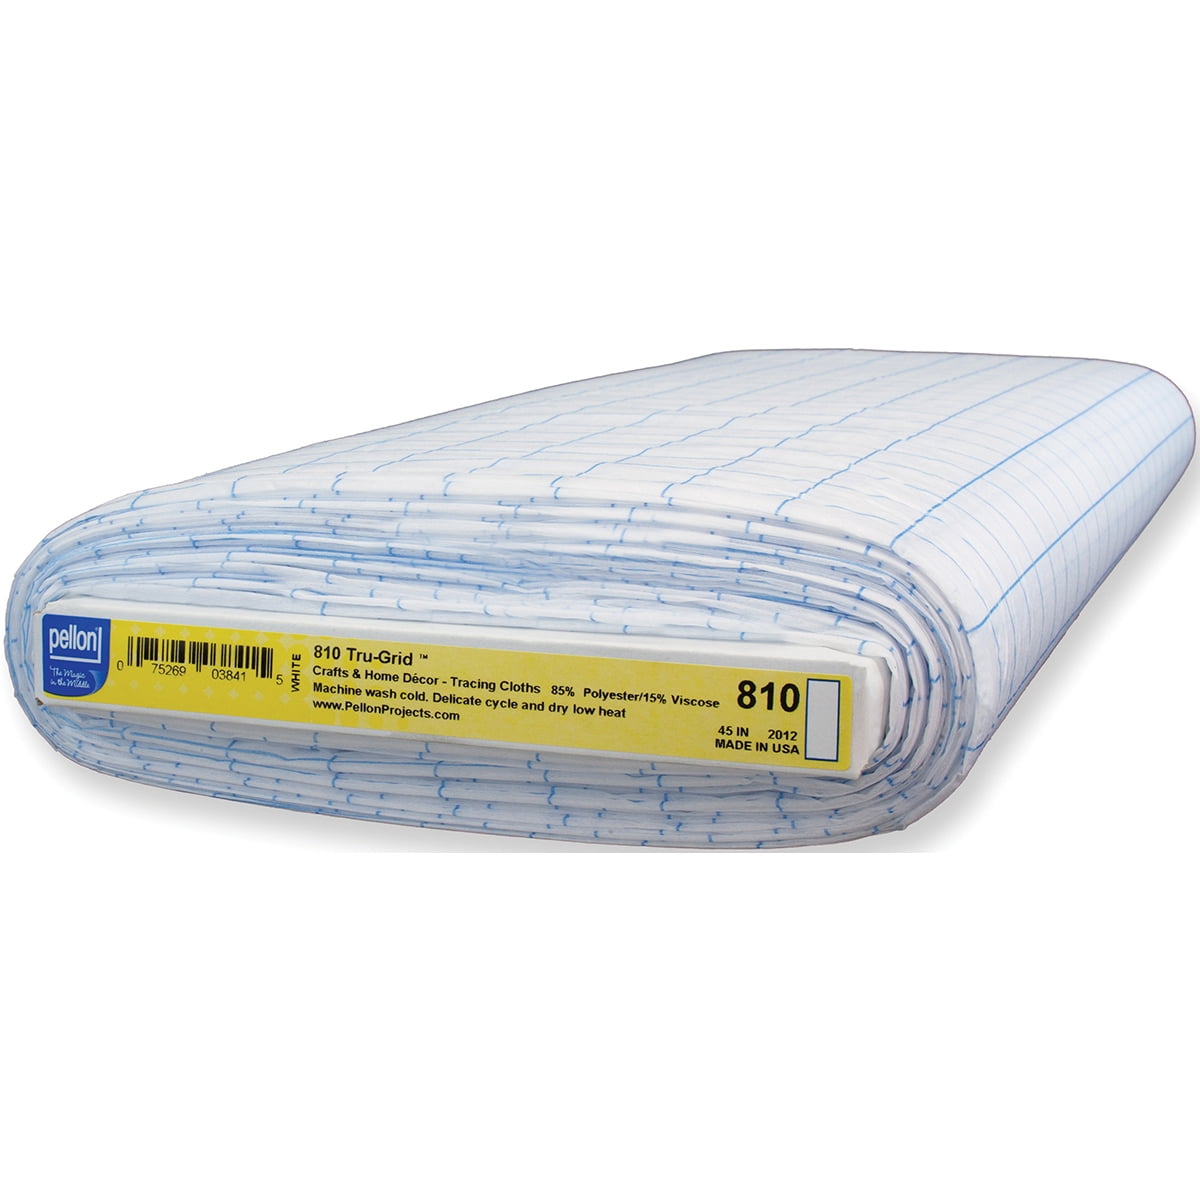 Warm Insul-Bright Insulated Lining 36x45, Multipack of 5